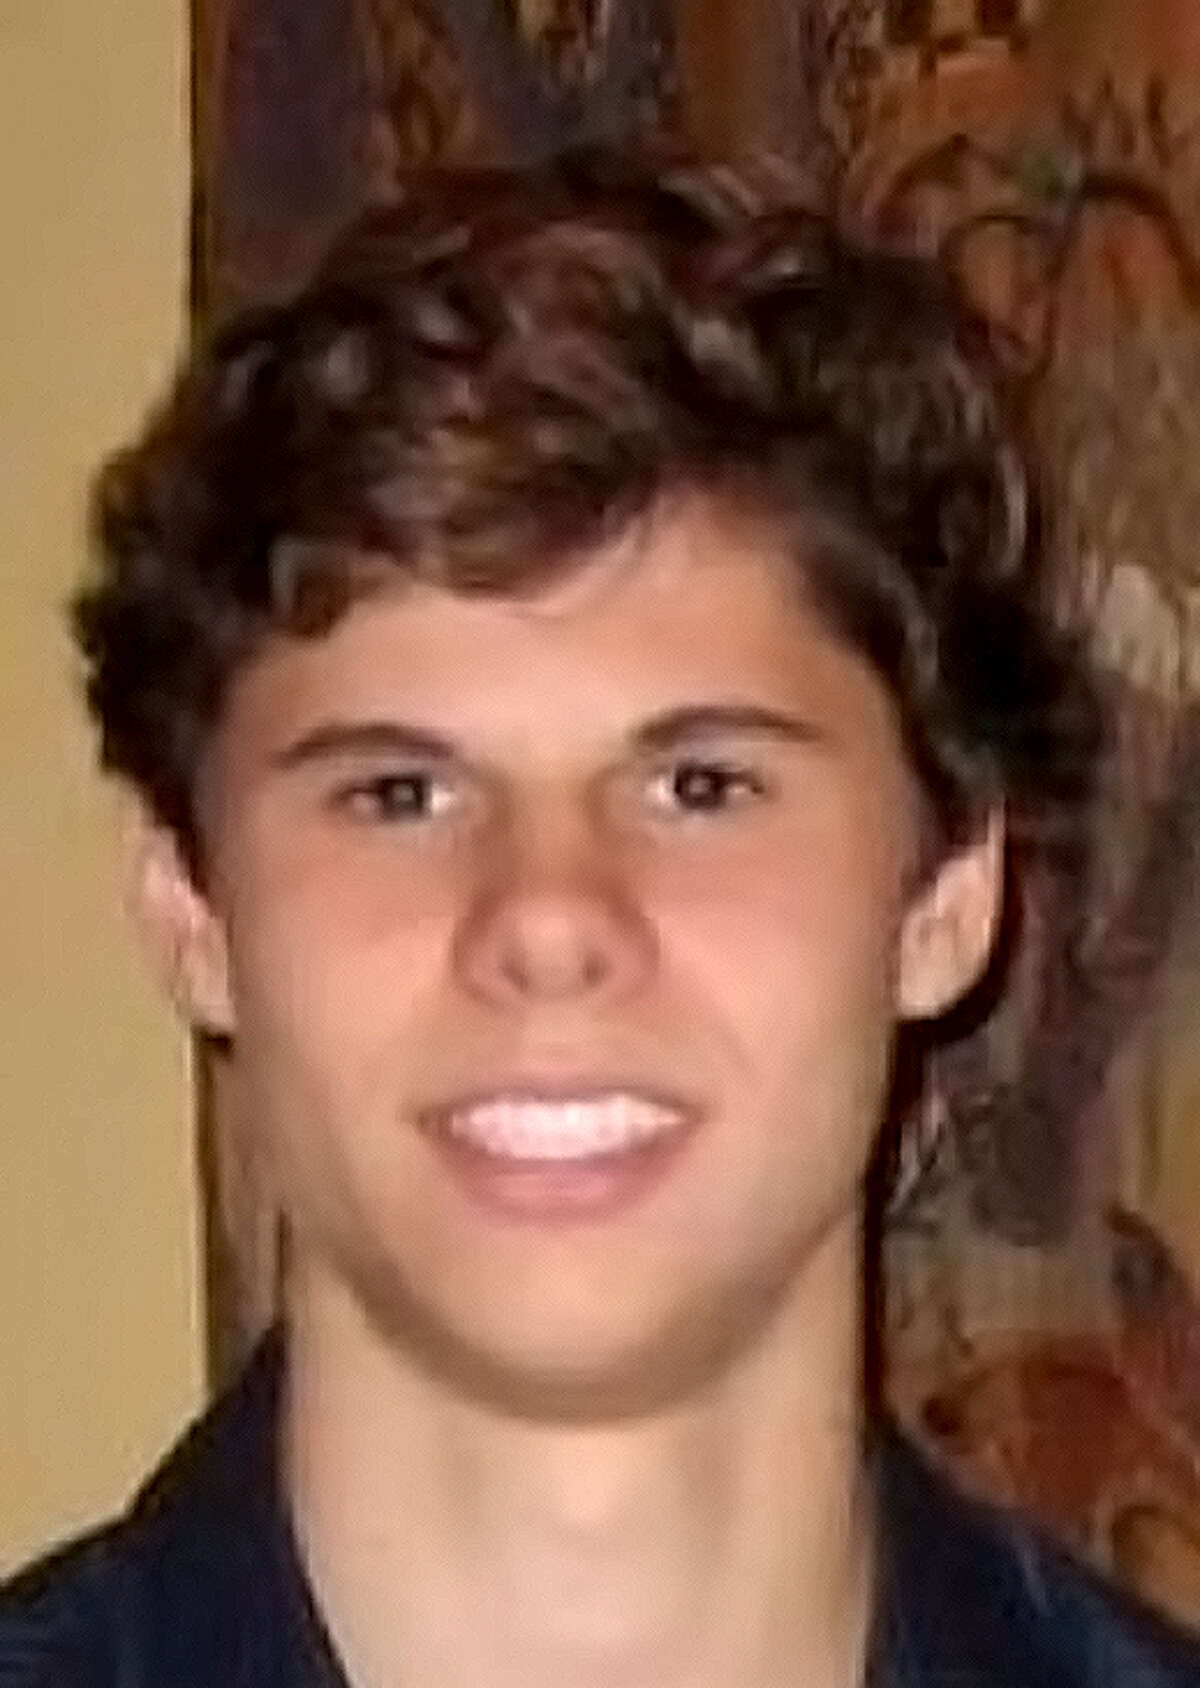 David Molak, 16, was found dead in his backyard in January. He had committed suicide.